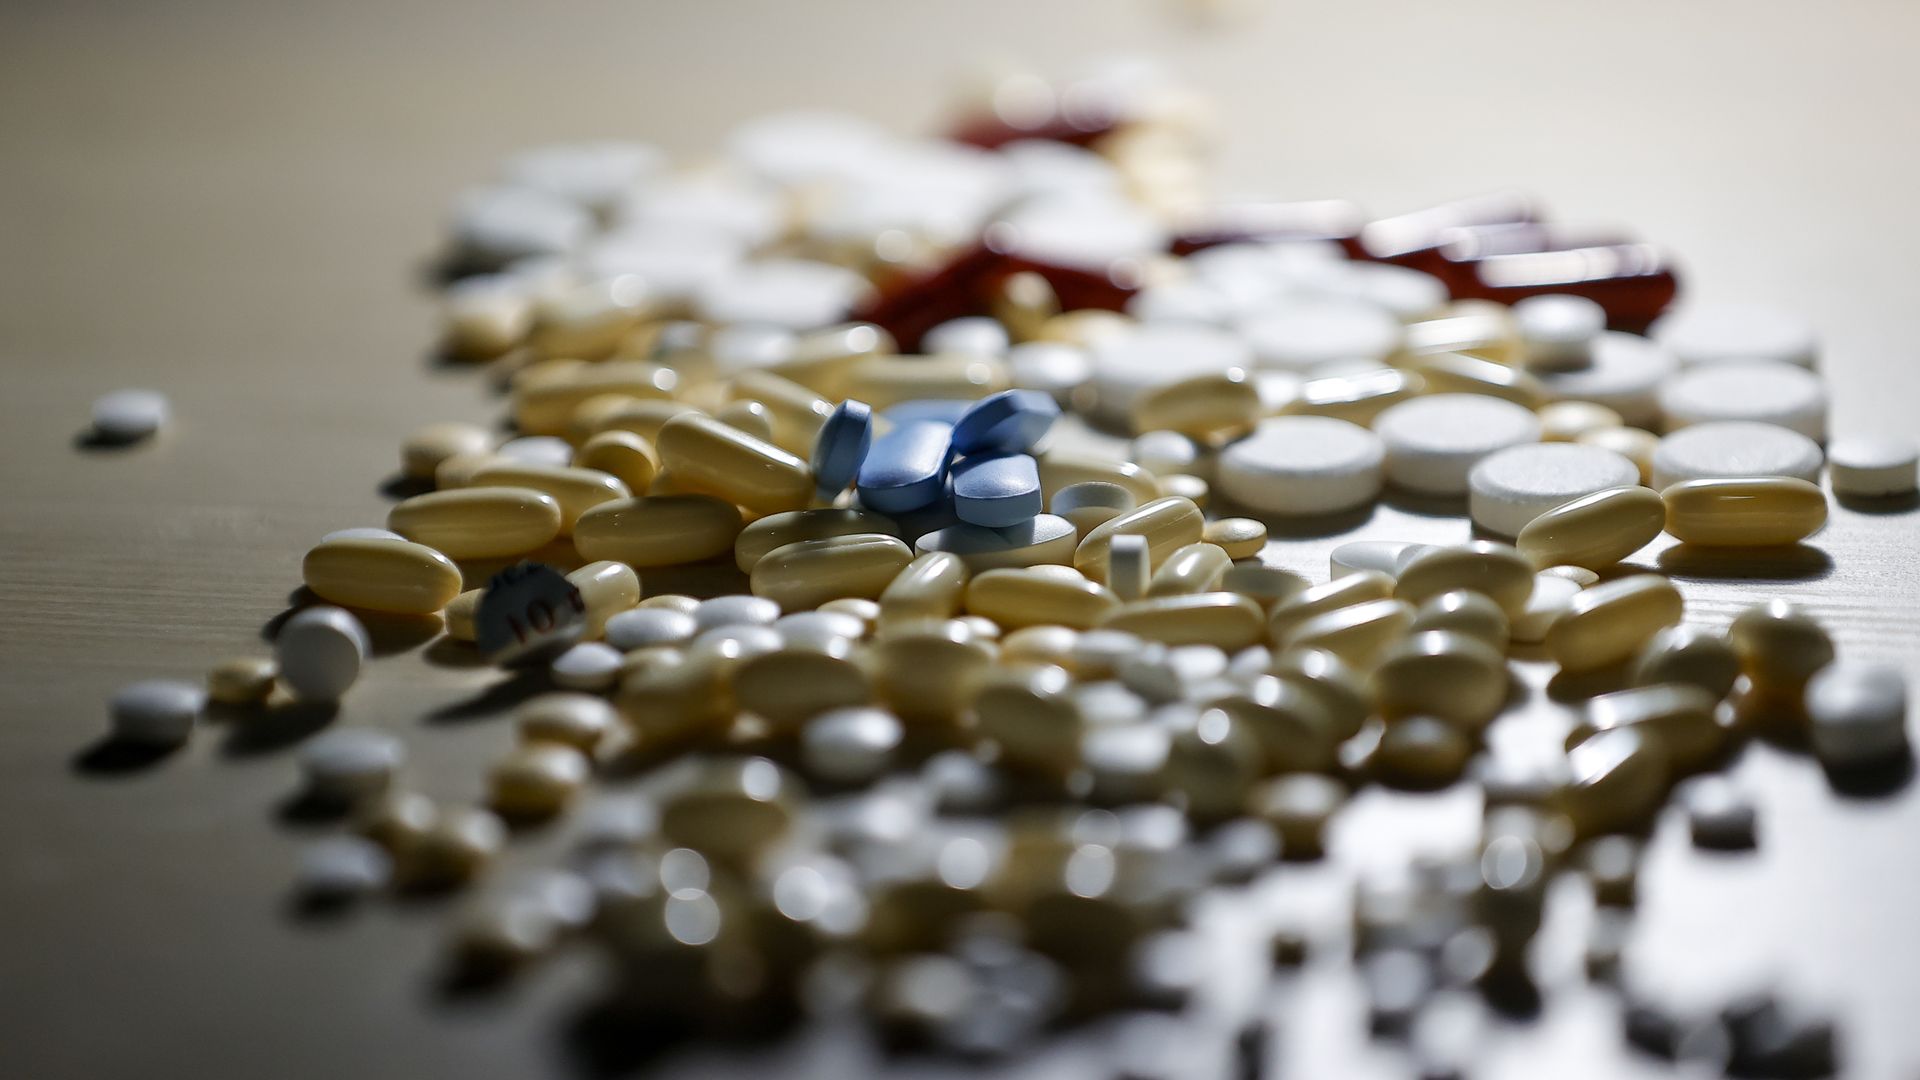 Pills scattered on a table.